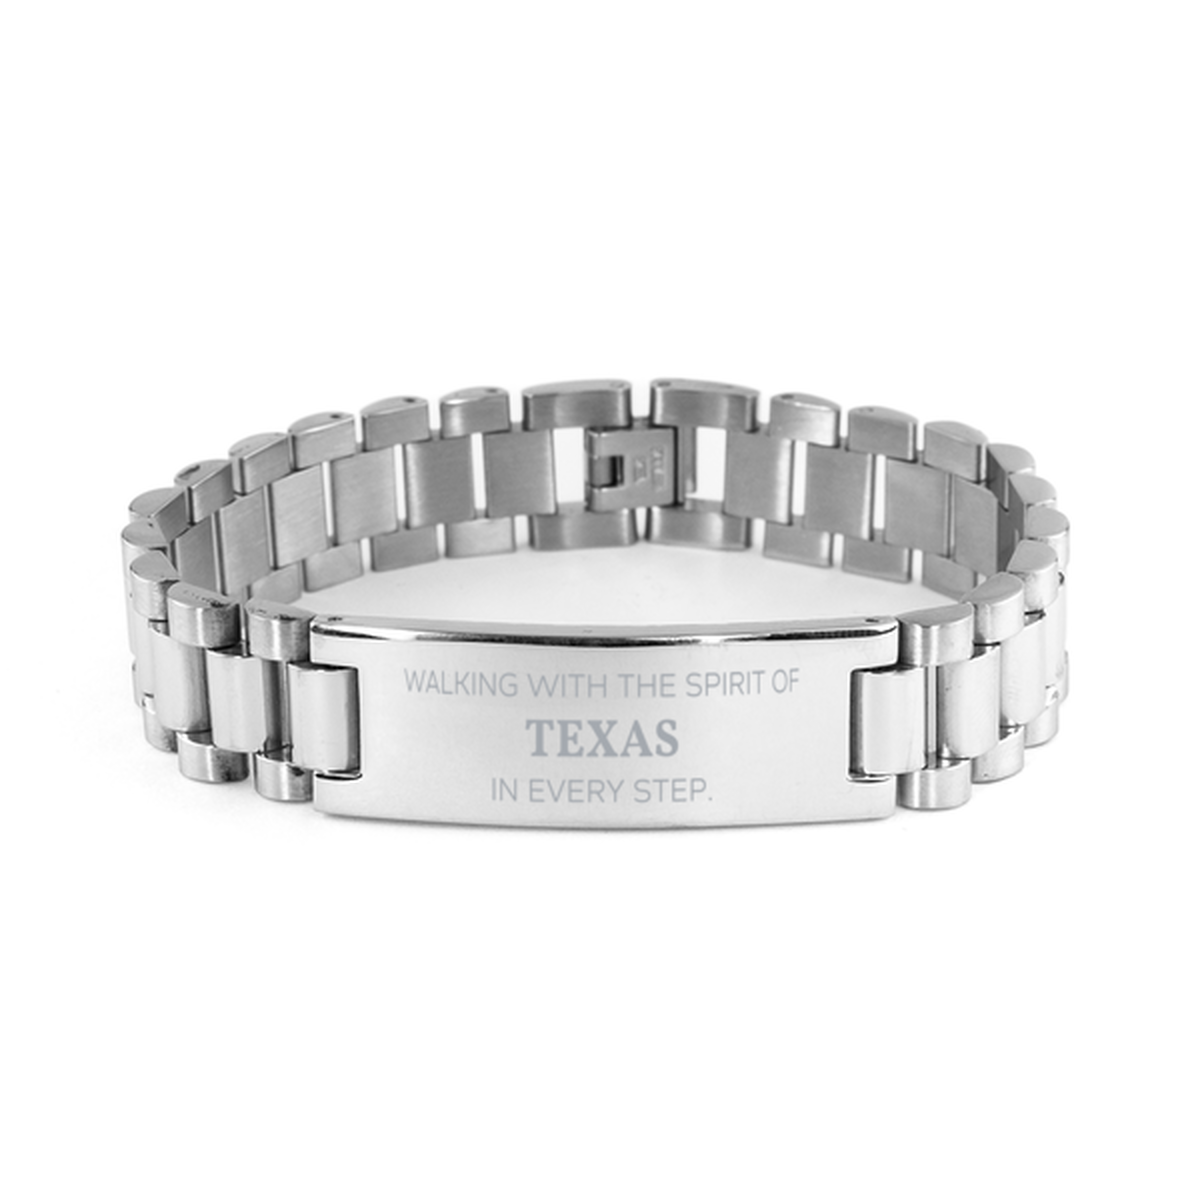 Texas Gifts, Walking with the spirit, Love Texas Birthday Christmas Ladder Stainless Steel Bracelet For Texas People, Men, Women, Friends